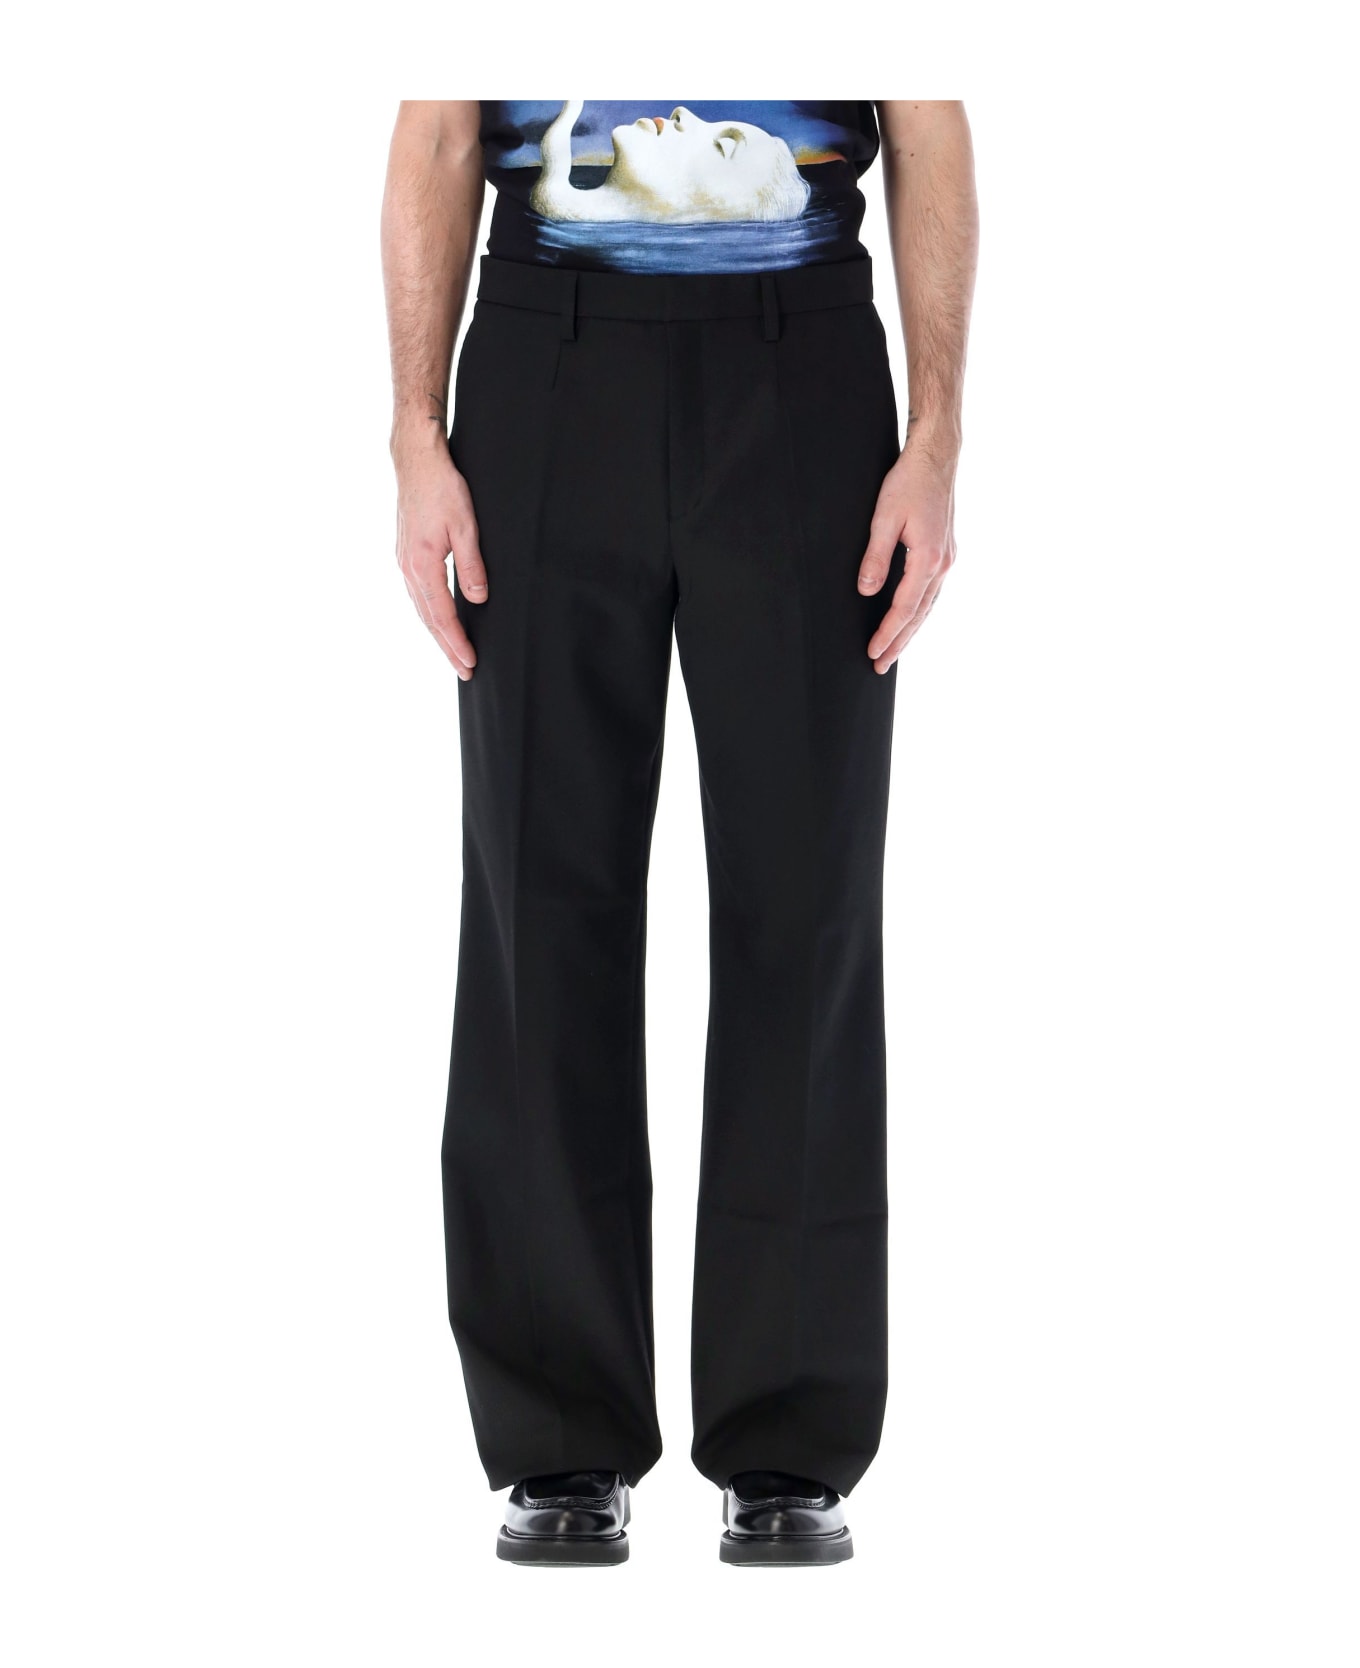 MISBHV Tailored Trousers - BLACK